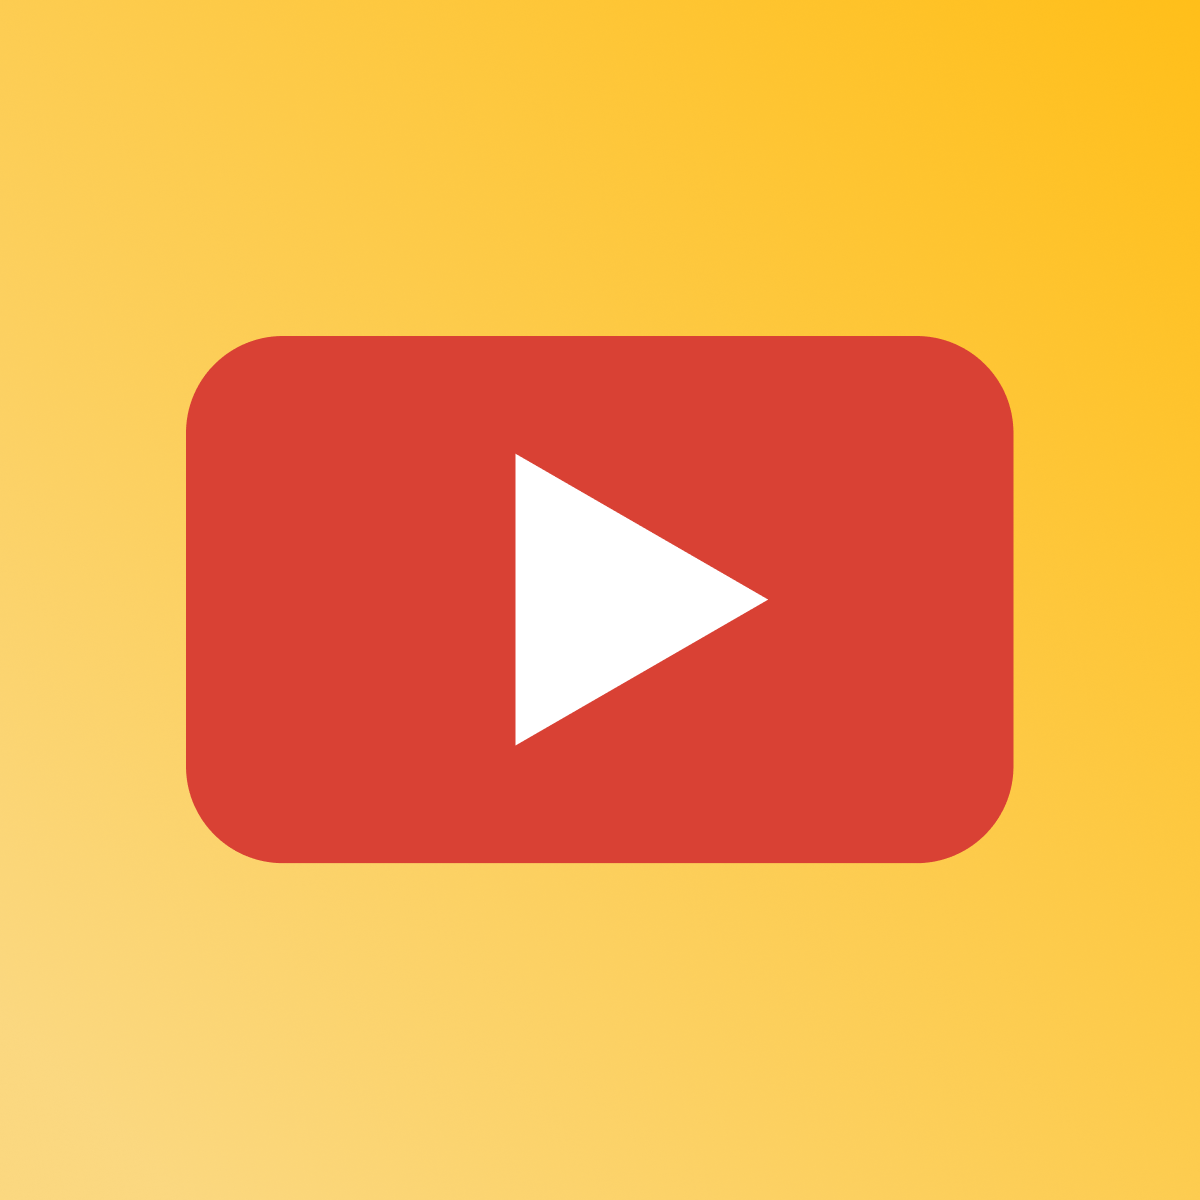 Hire Shopify Experts to integrate Reputon YouTube Video Gallery app into a Shopify store